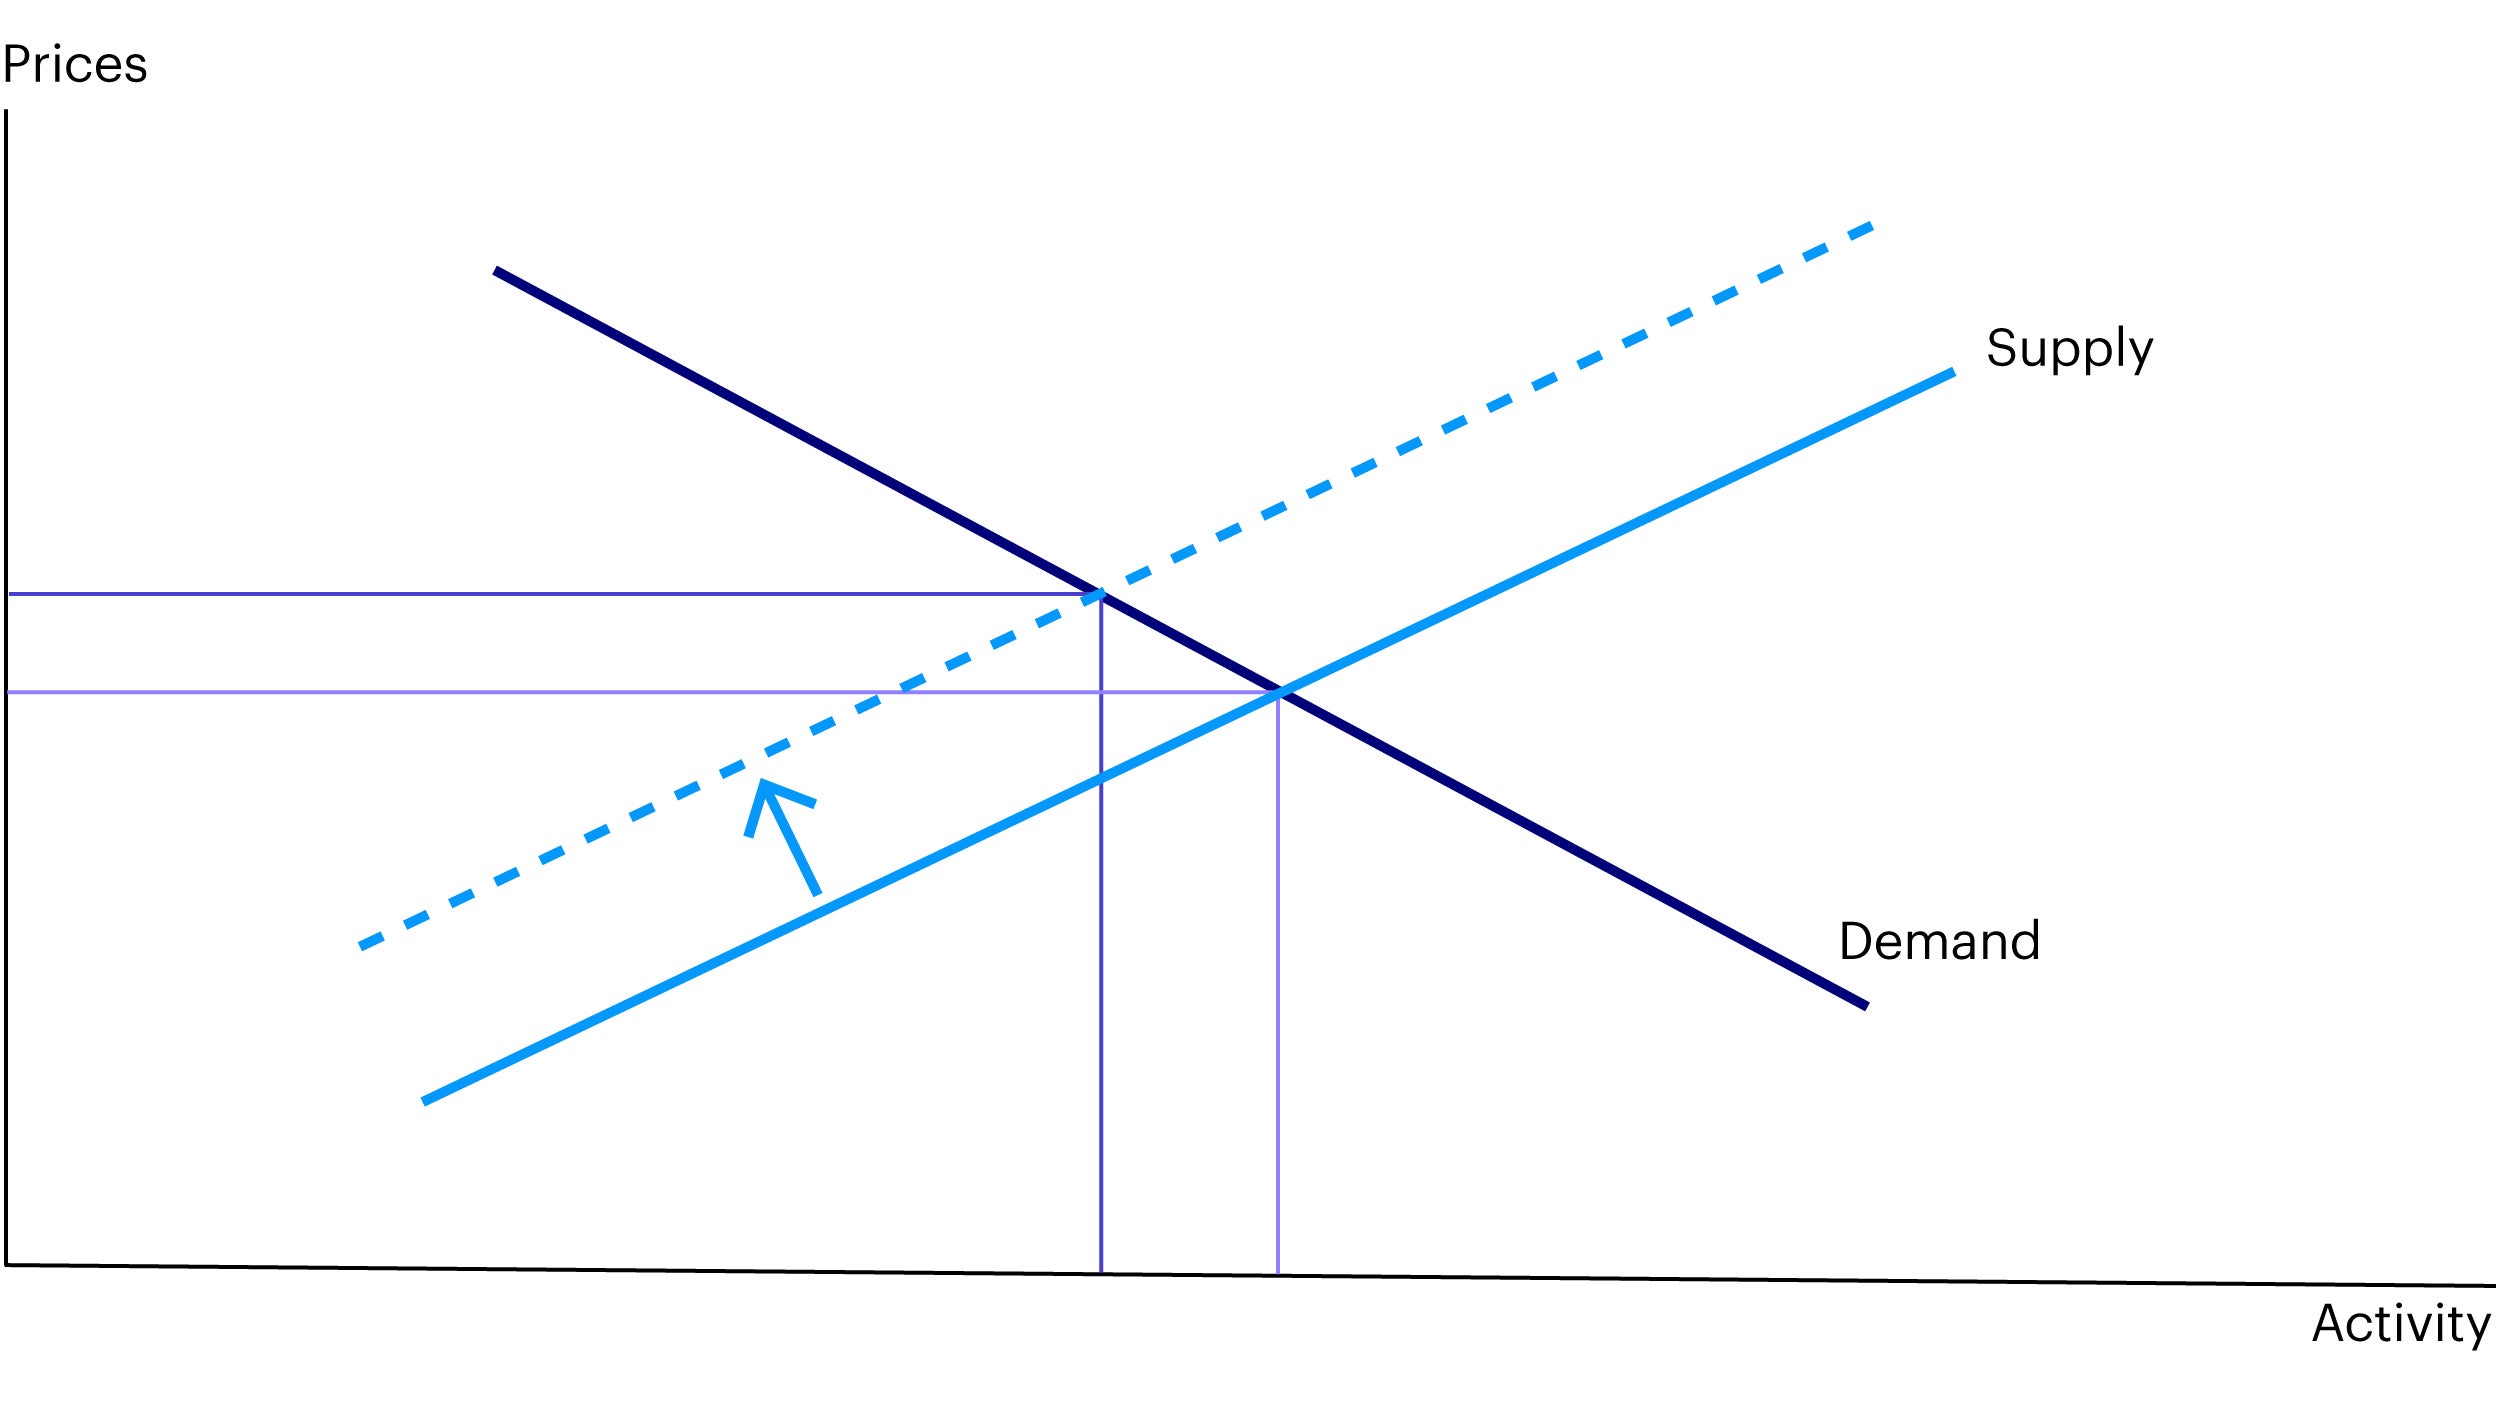 Figure 1. Supply and Demand; Prices and Output